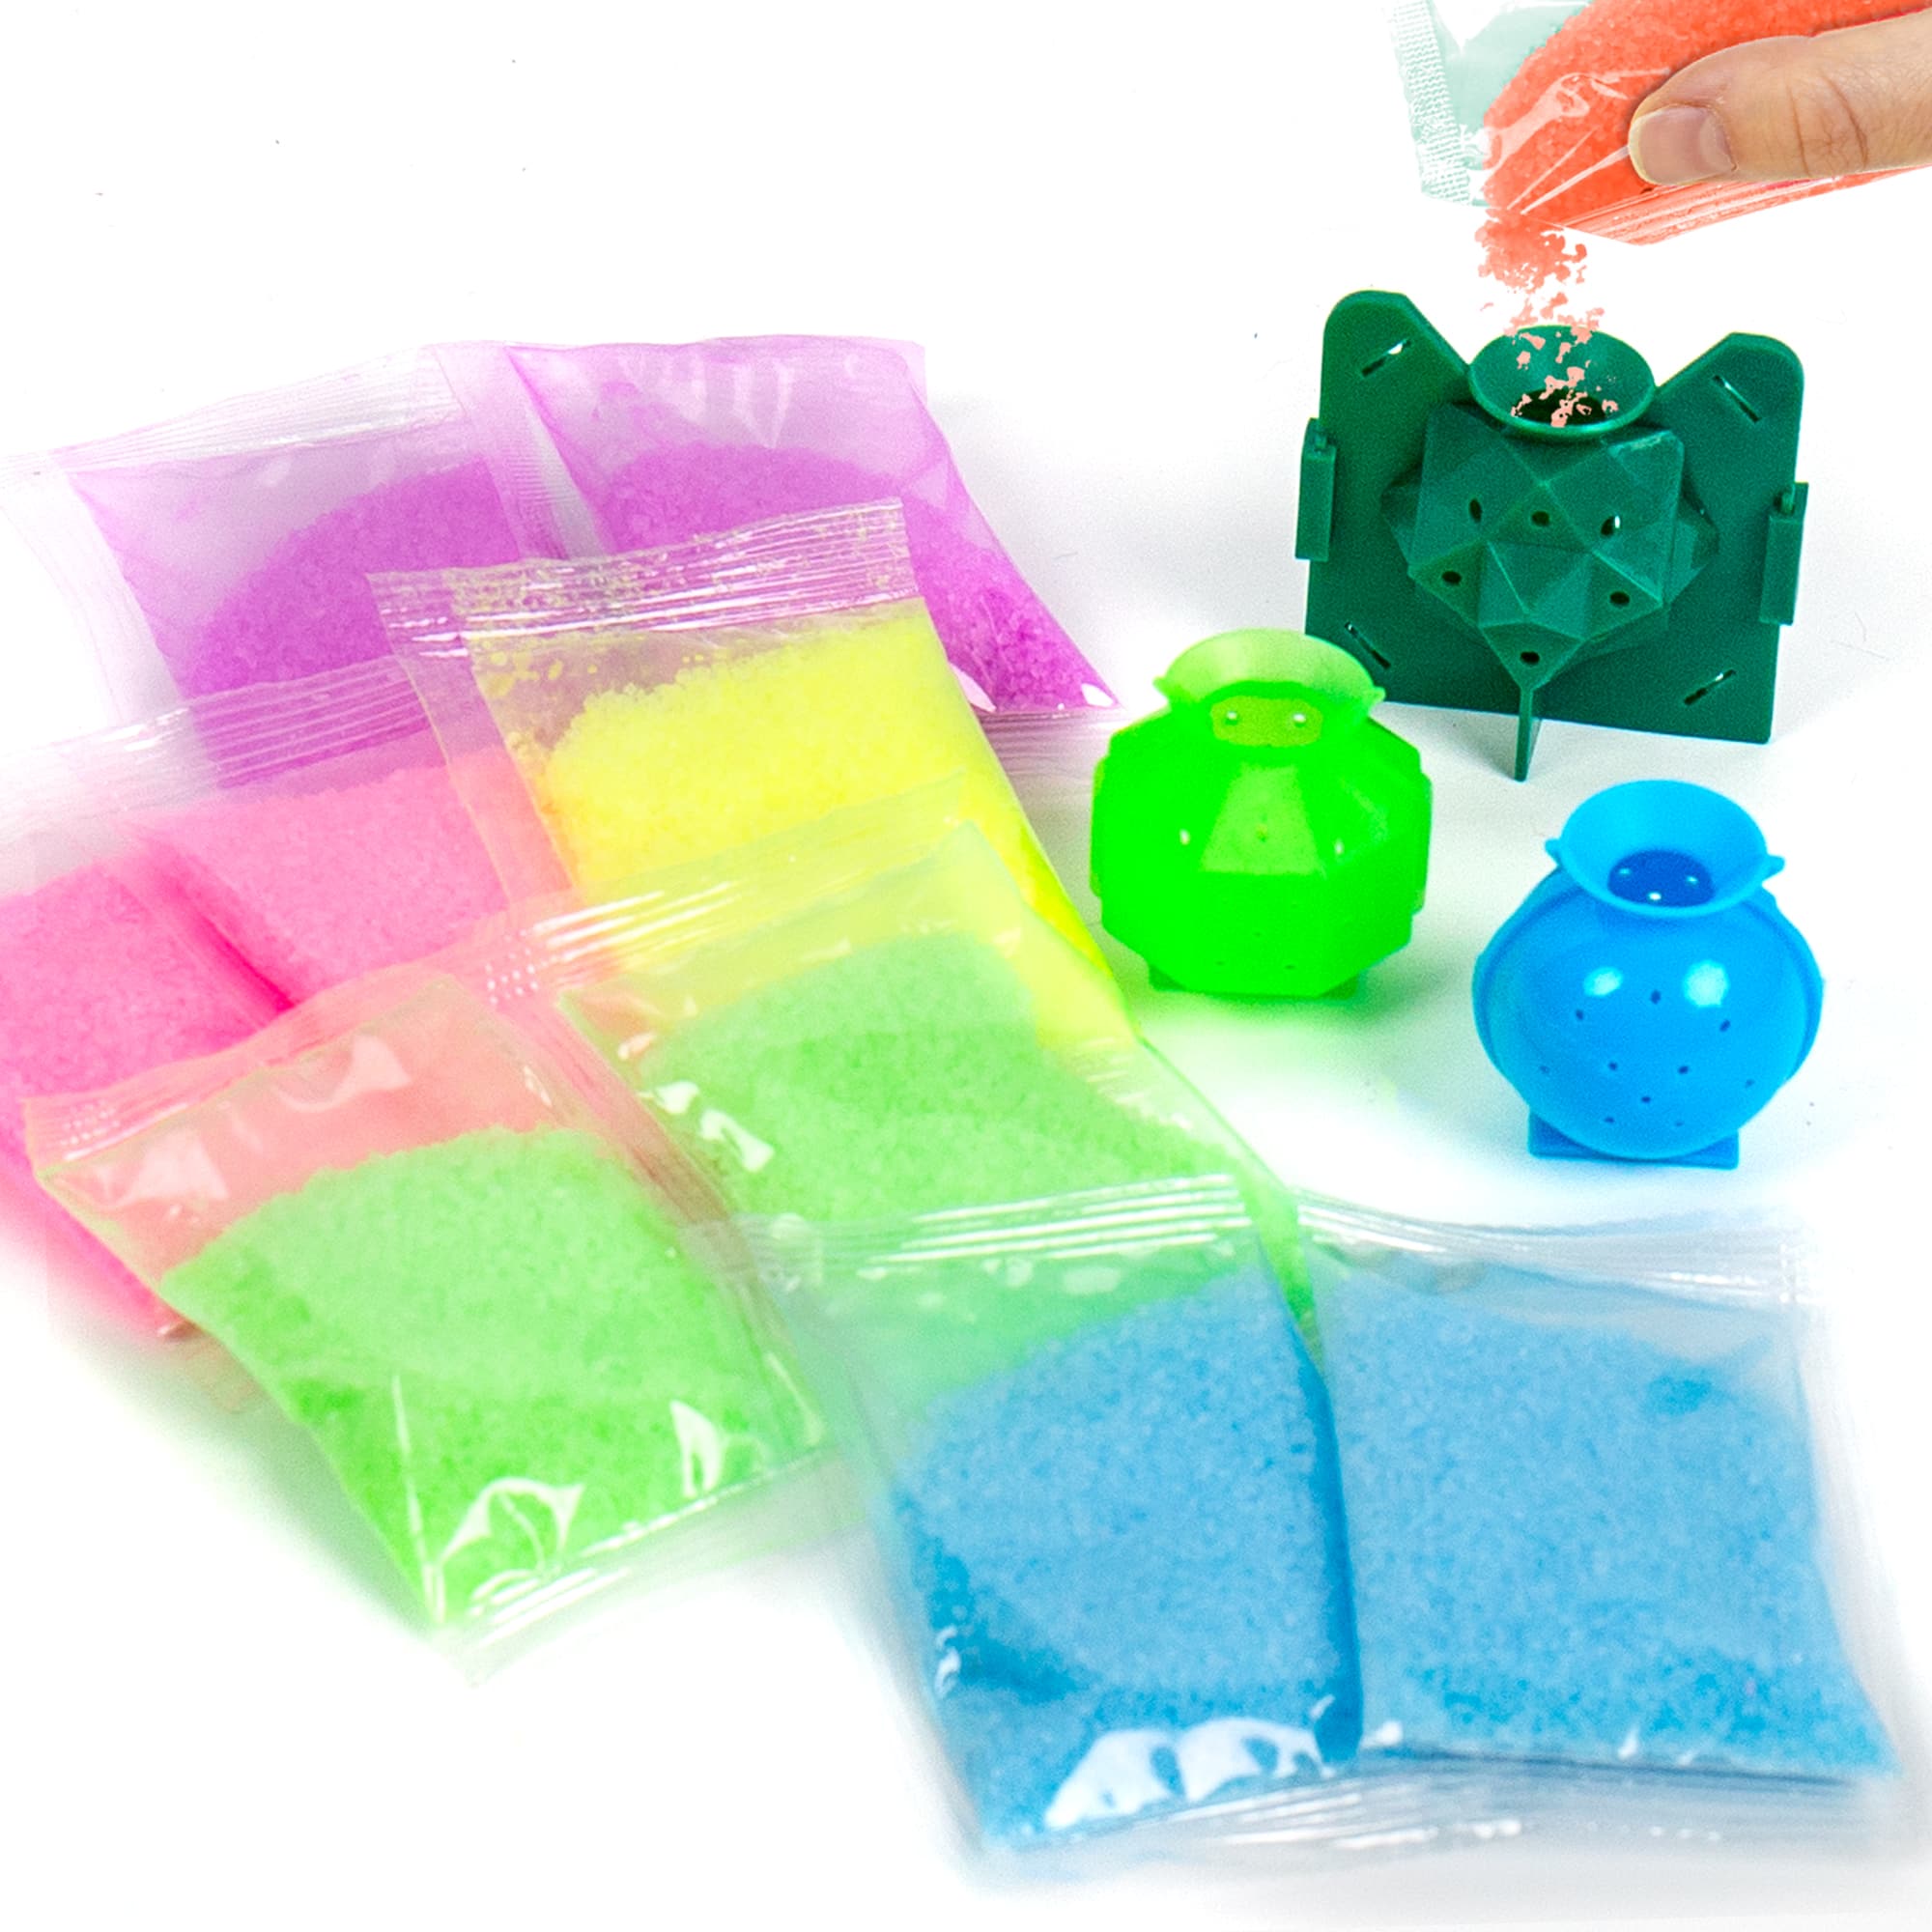 12 Pack: Color Zone&#xAE; Create Your Own Power Balls